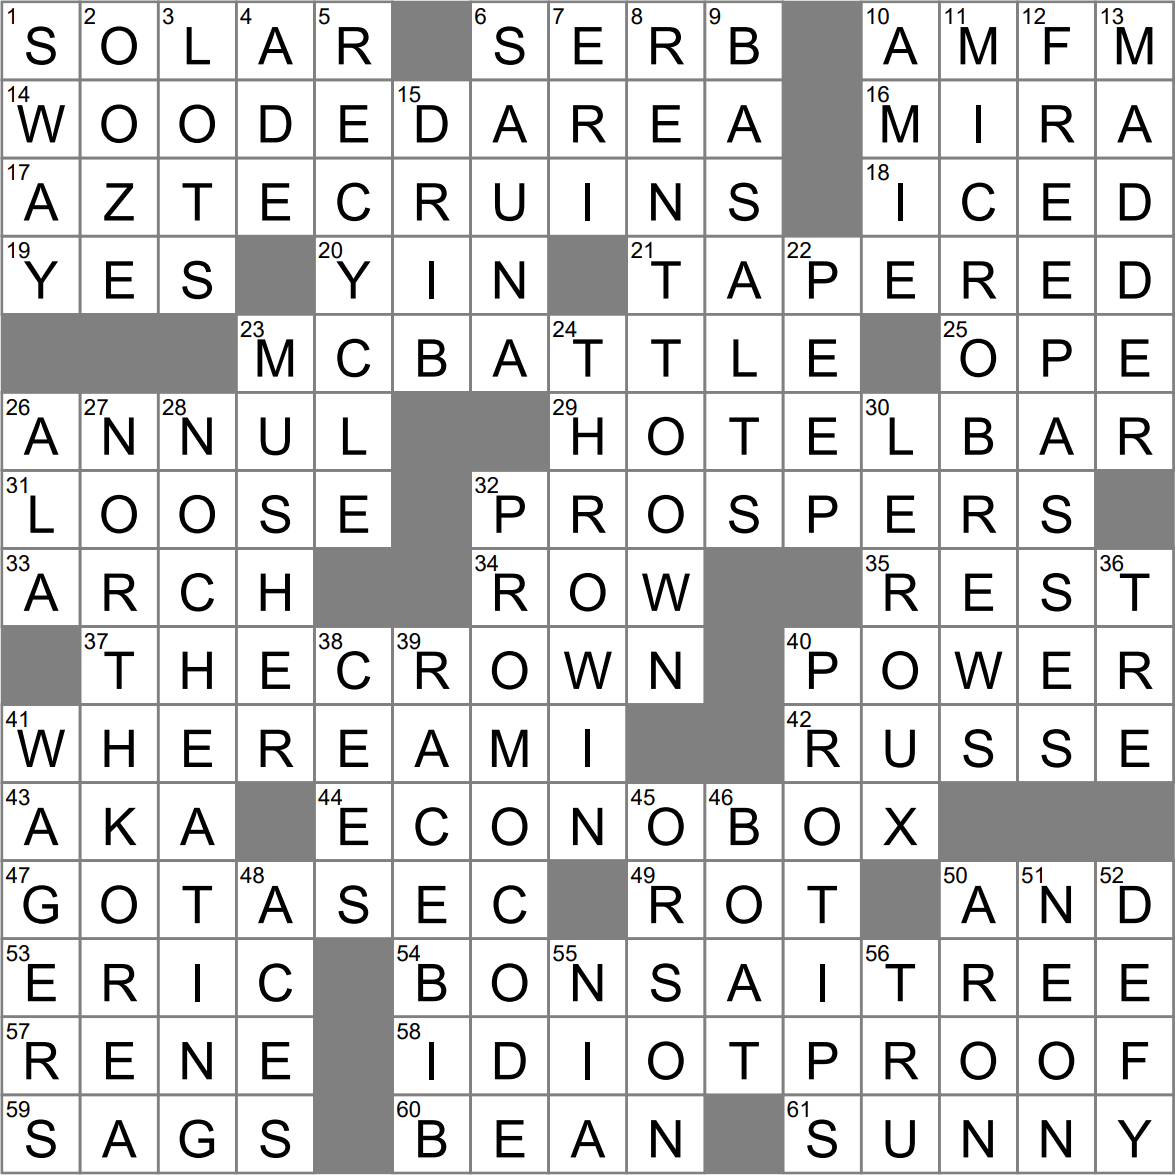 One with artistic training? crossword clue Archives LAXCrossword com